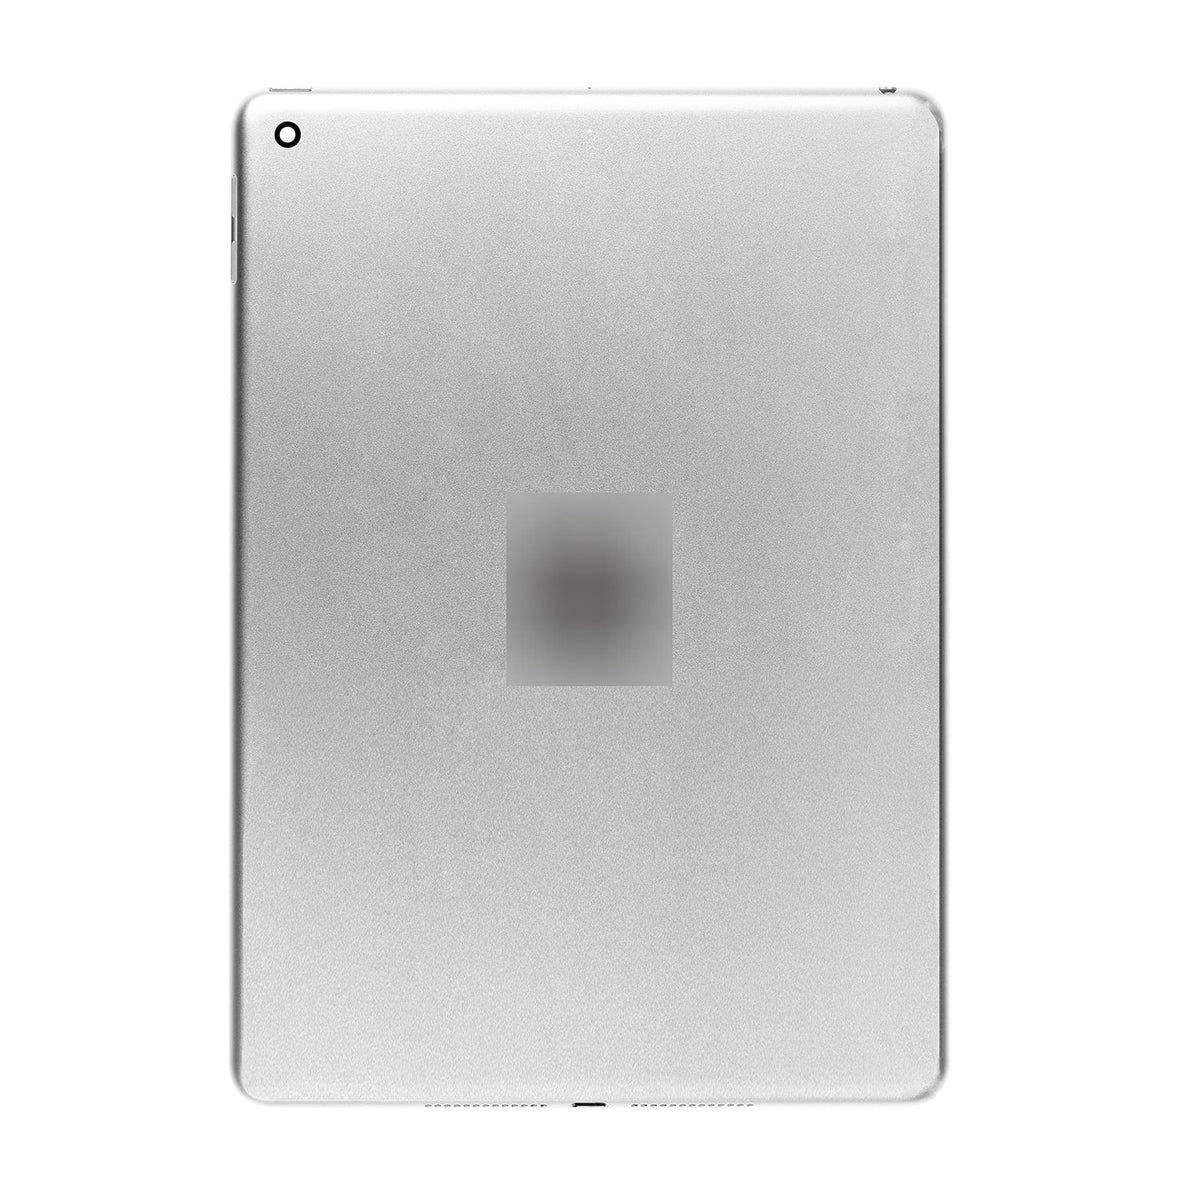 SILVER BACK COVER (WIFI VERSION) FOR IPAD 6